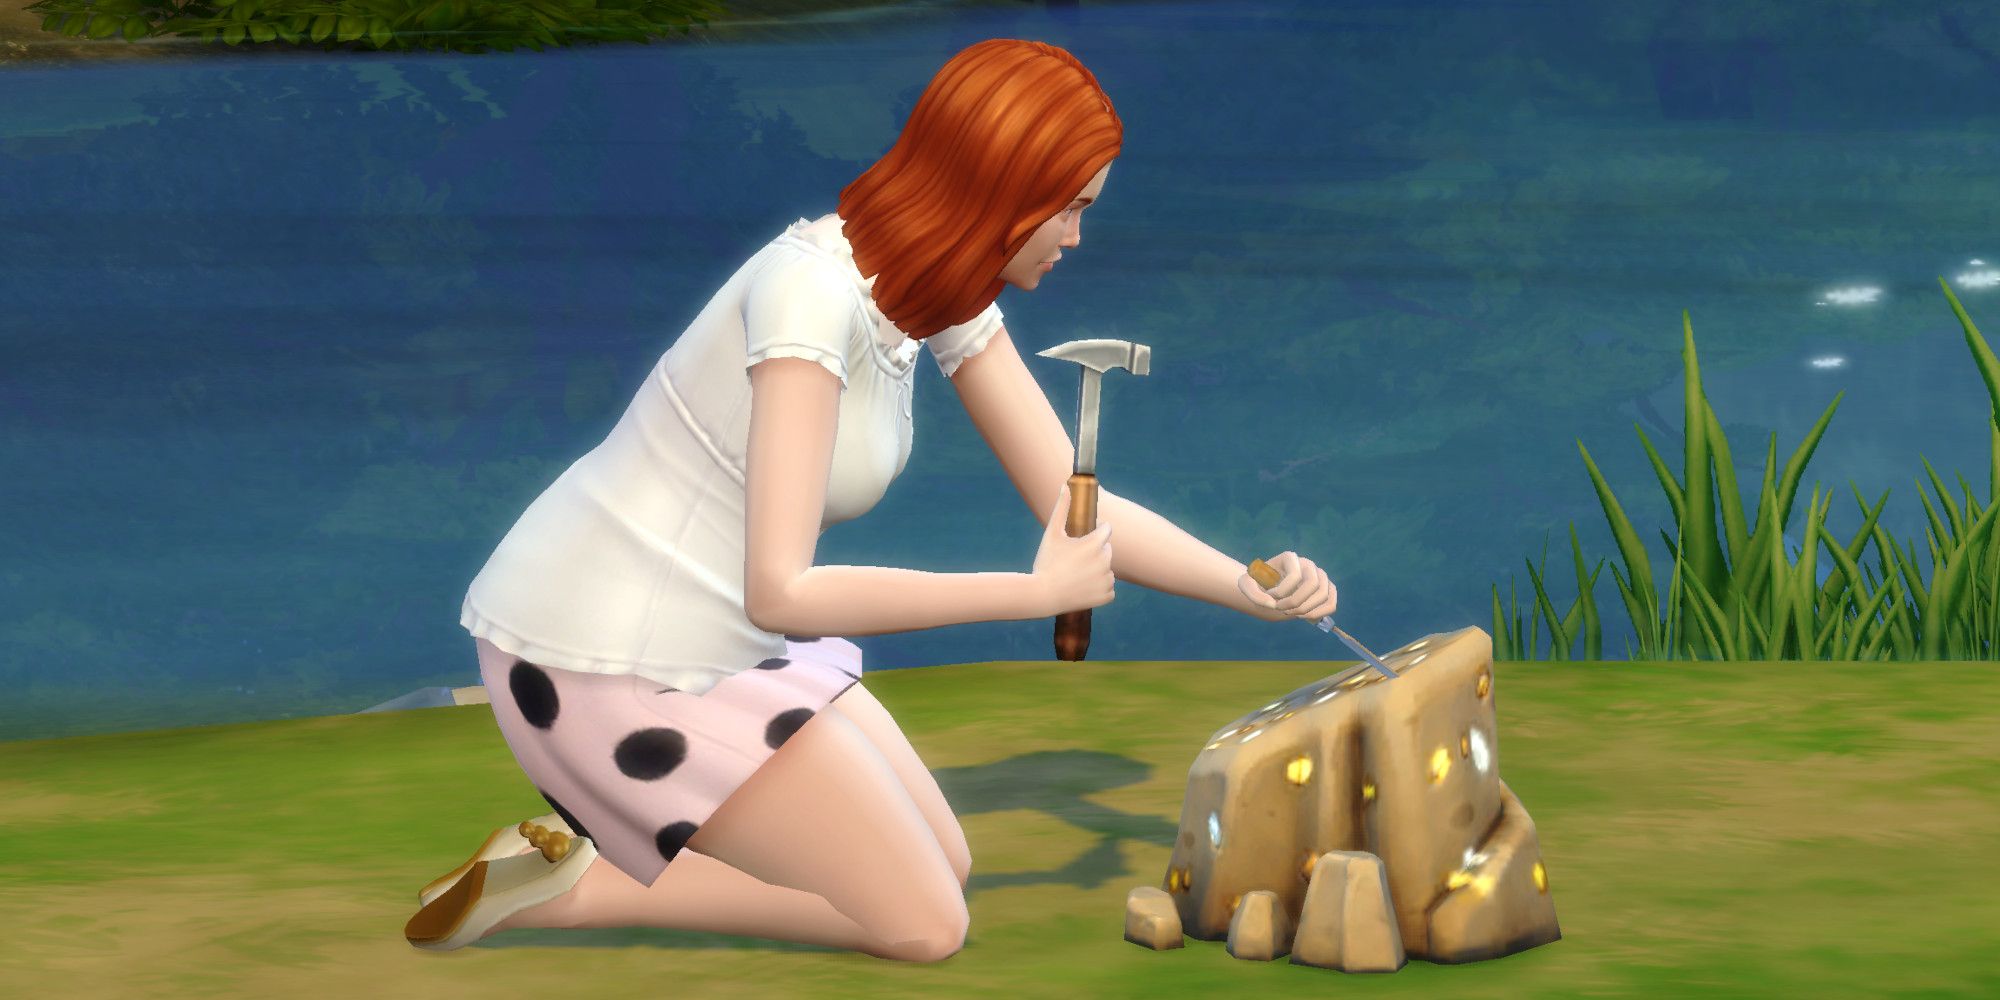 Sim from The Sims 4 kneels down and hacks into metal rock with a hammer and chisel